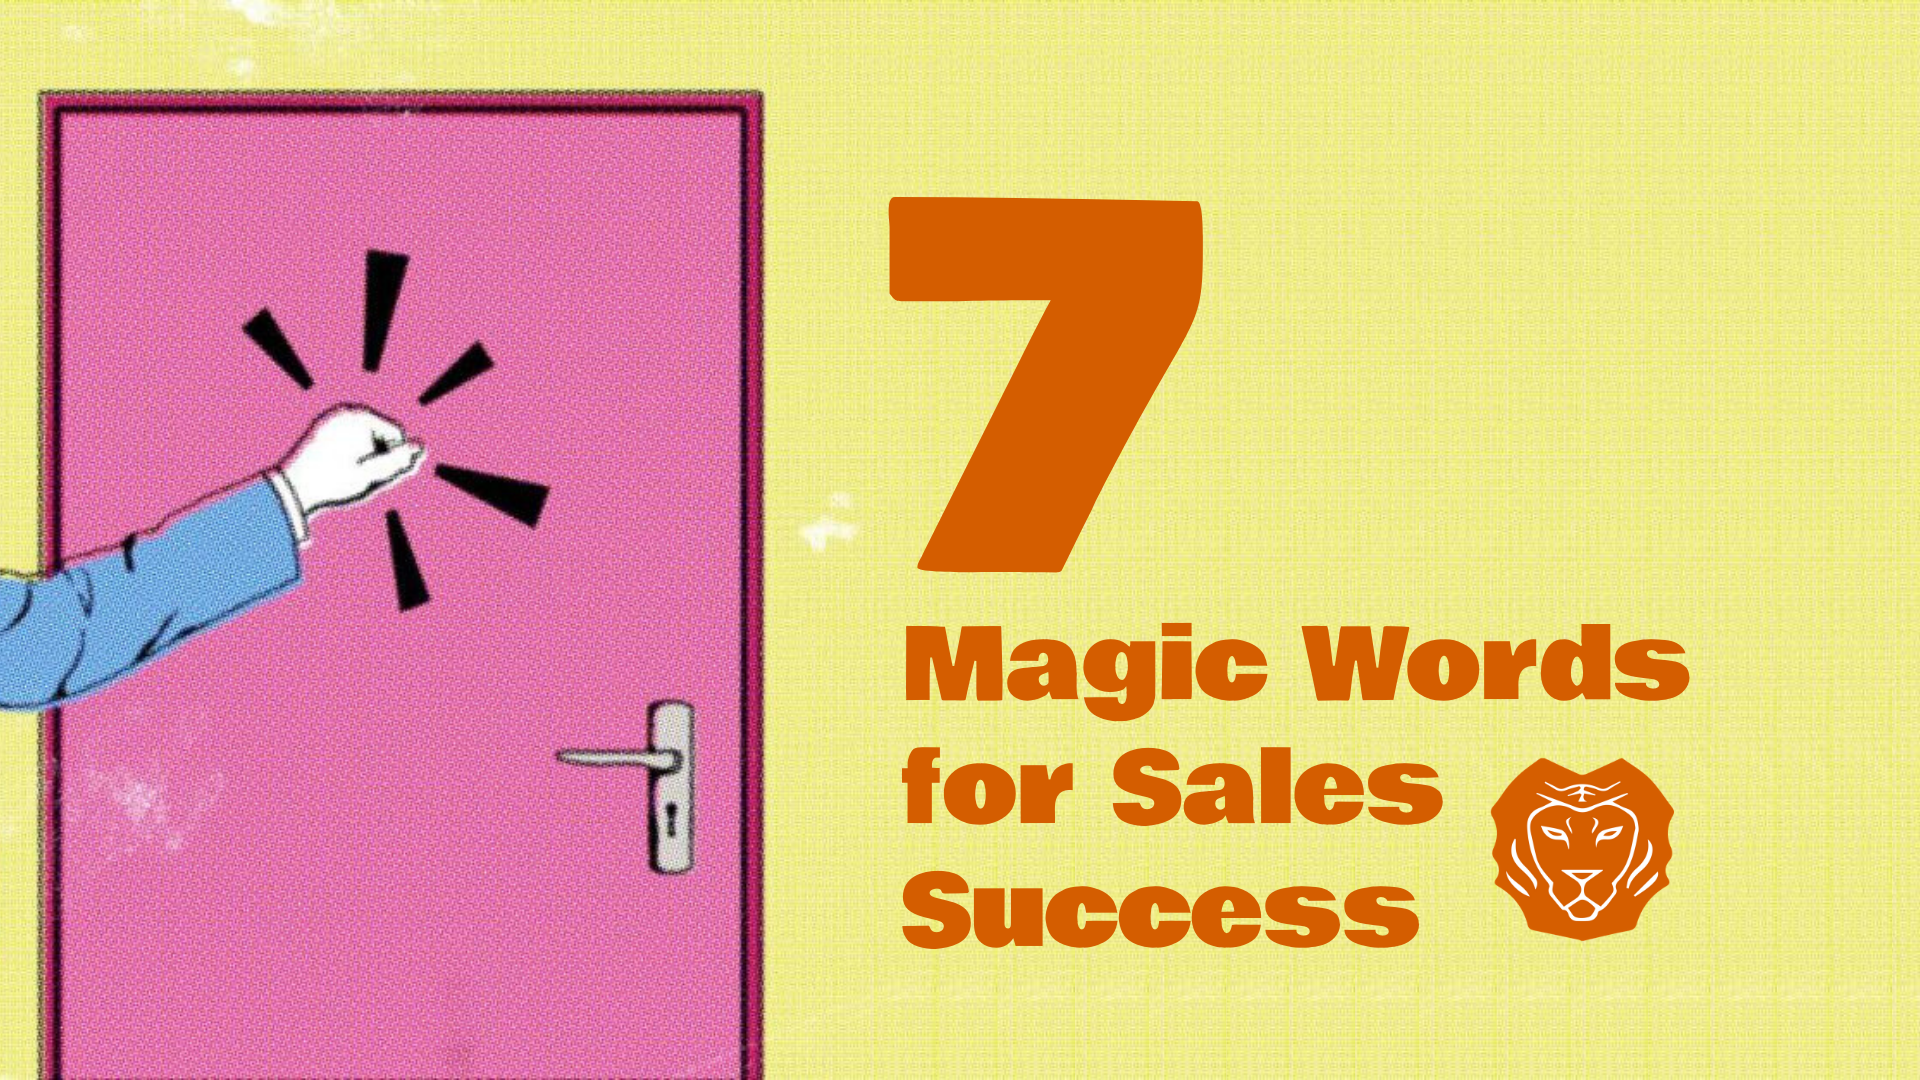 7 Magic Words for Sales Success